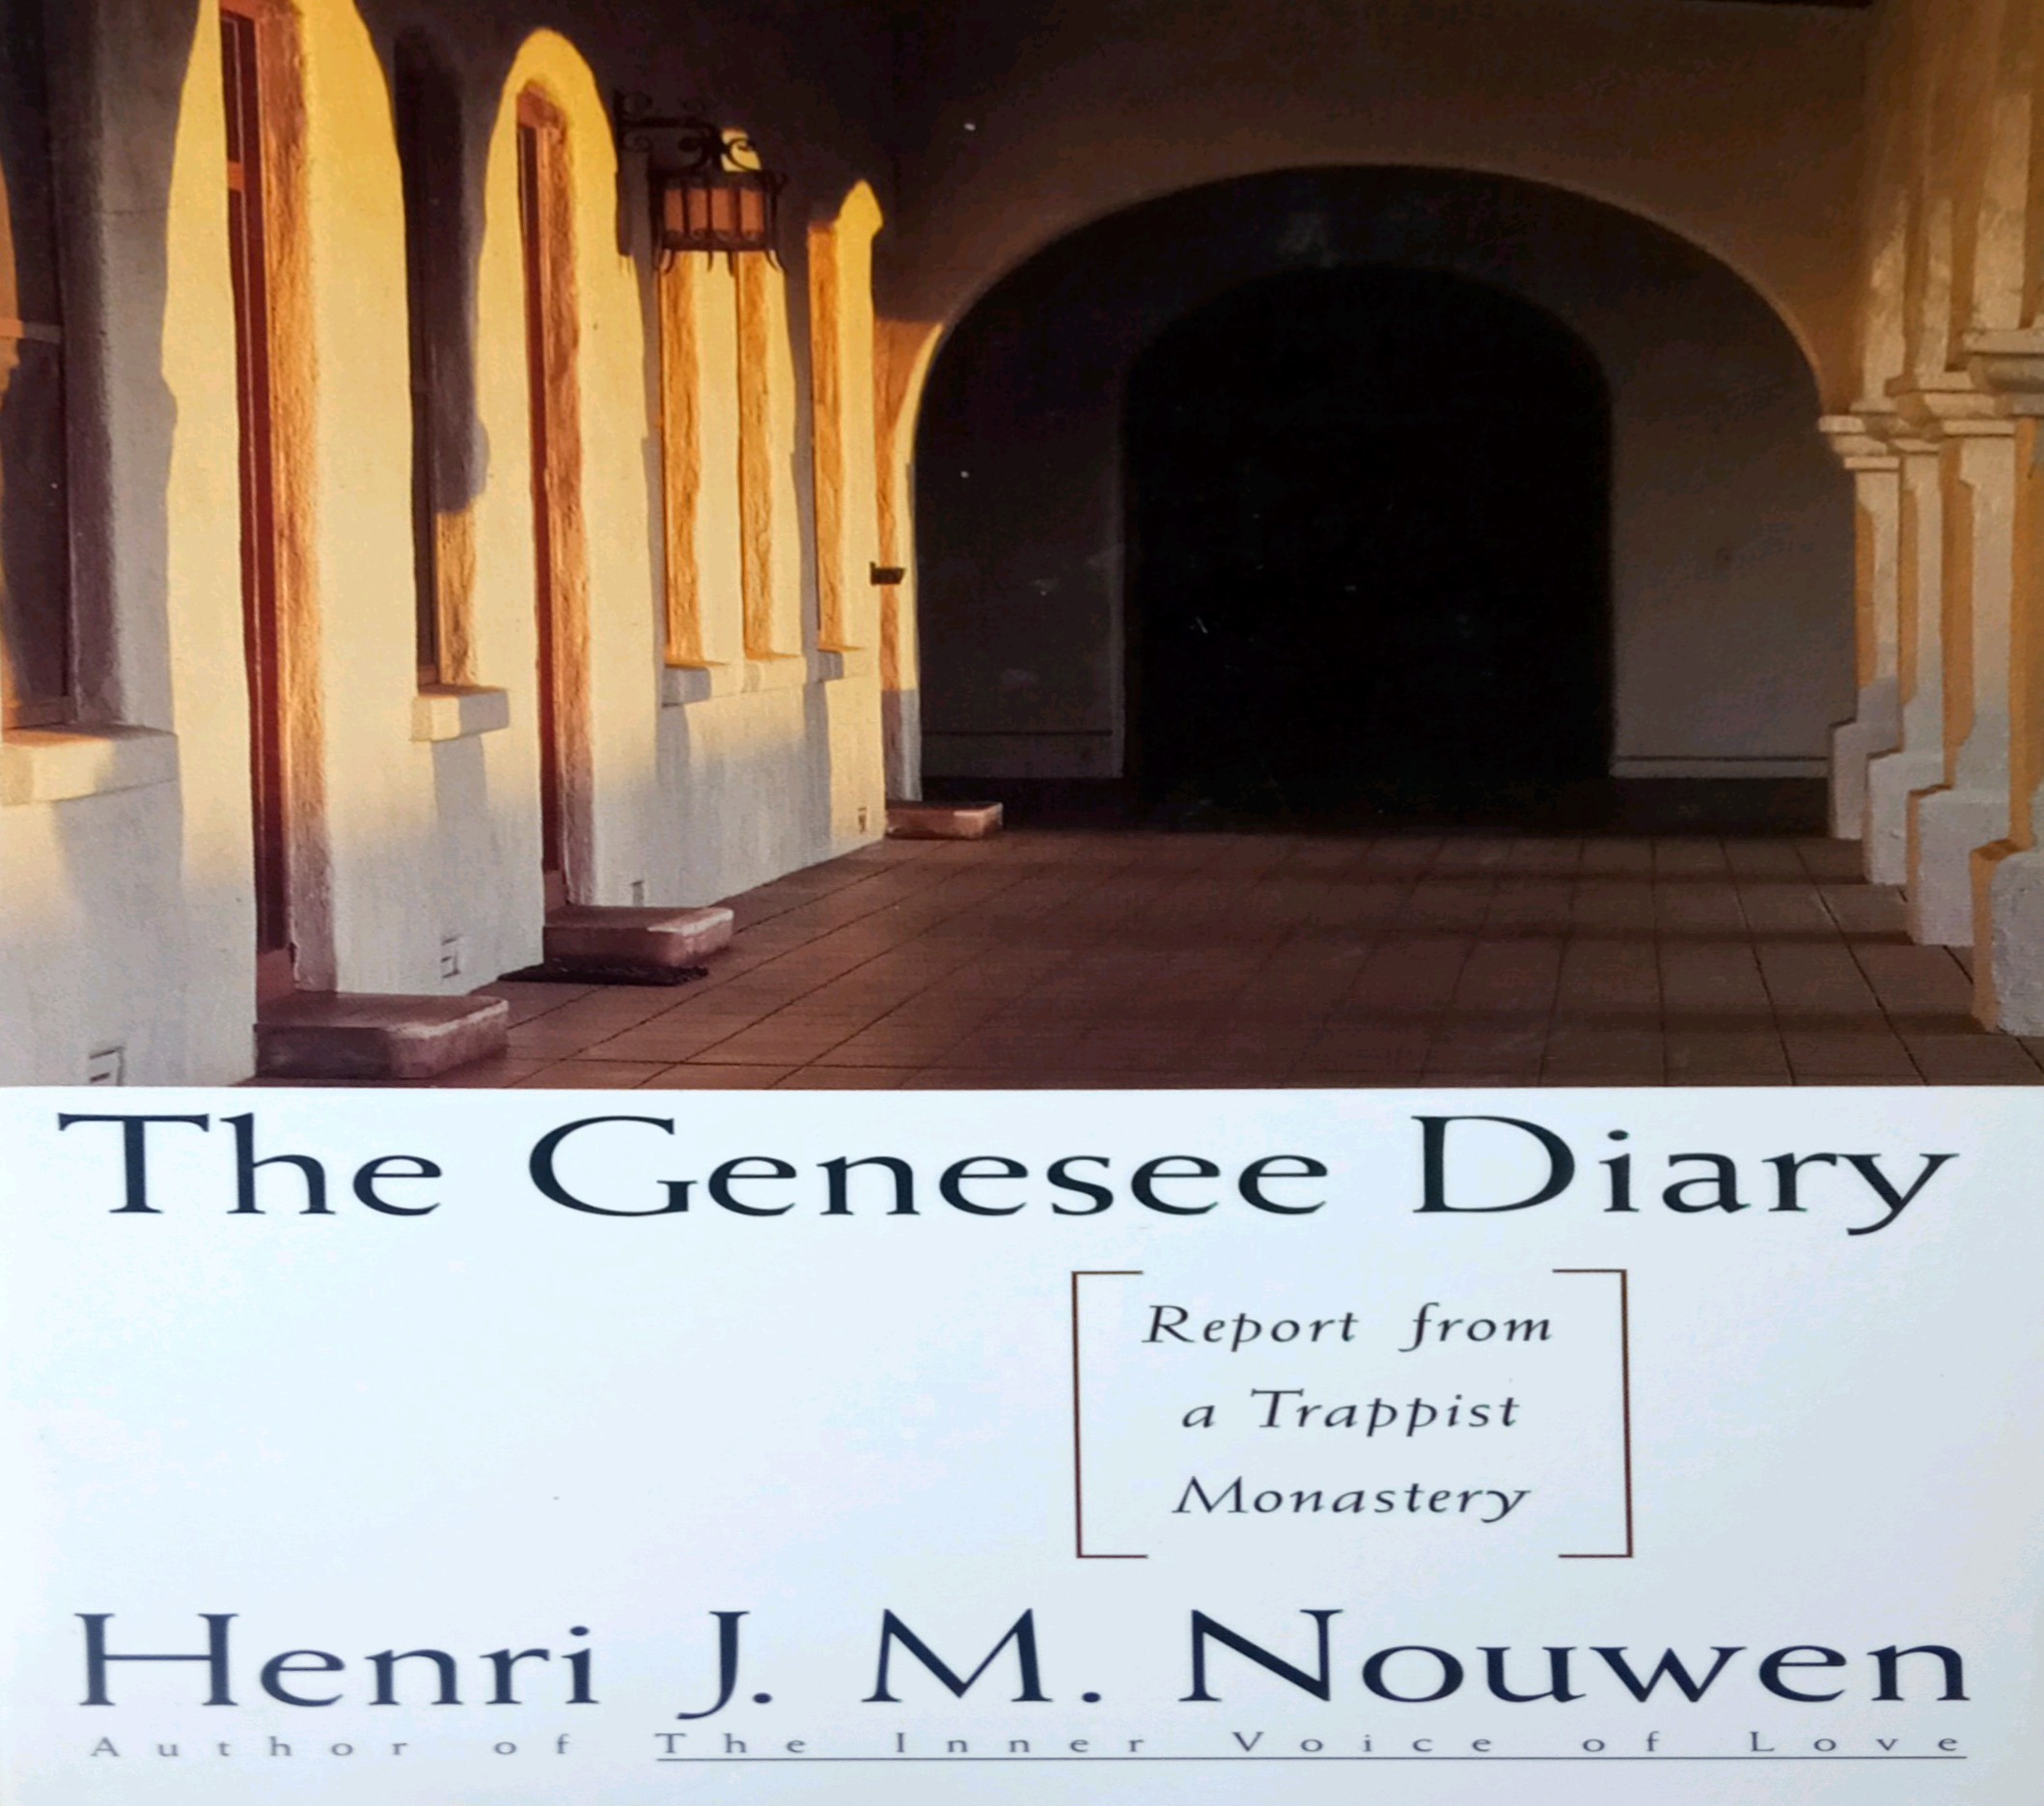 THE GENESEE DIARY: REPORT FROM A TRAPPIST MONASTERY